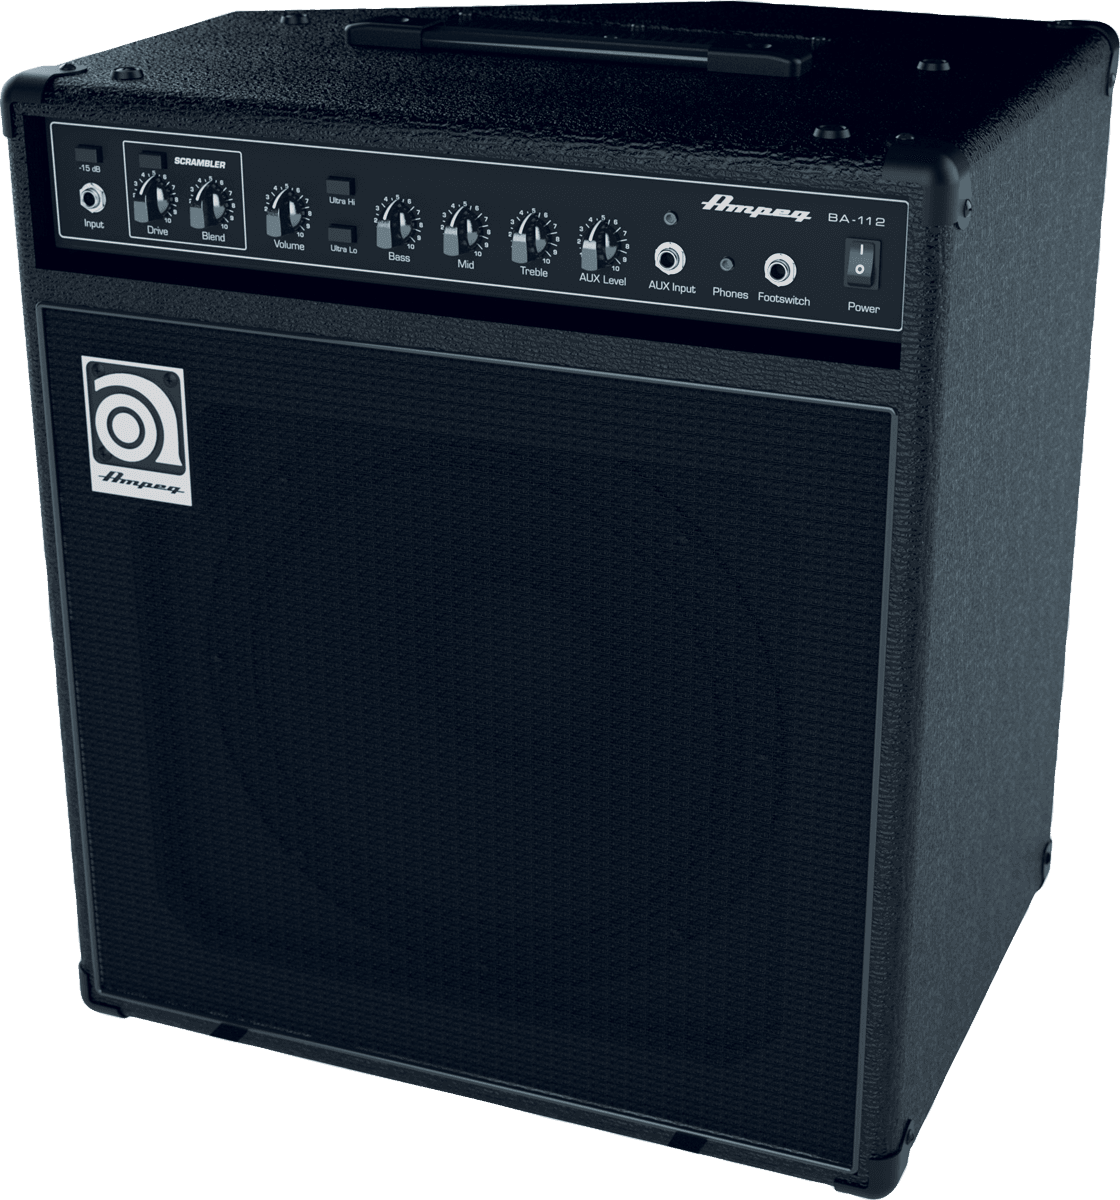 Ampeg Ba-112 V2 2014 75w 1x12 Black - Bass combo amp - Main picture